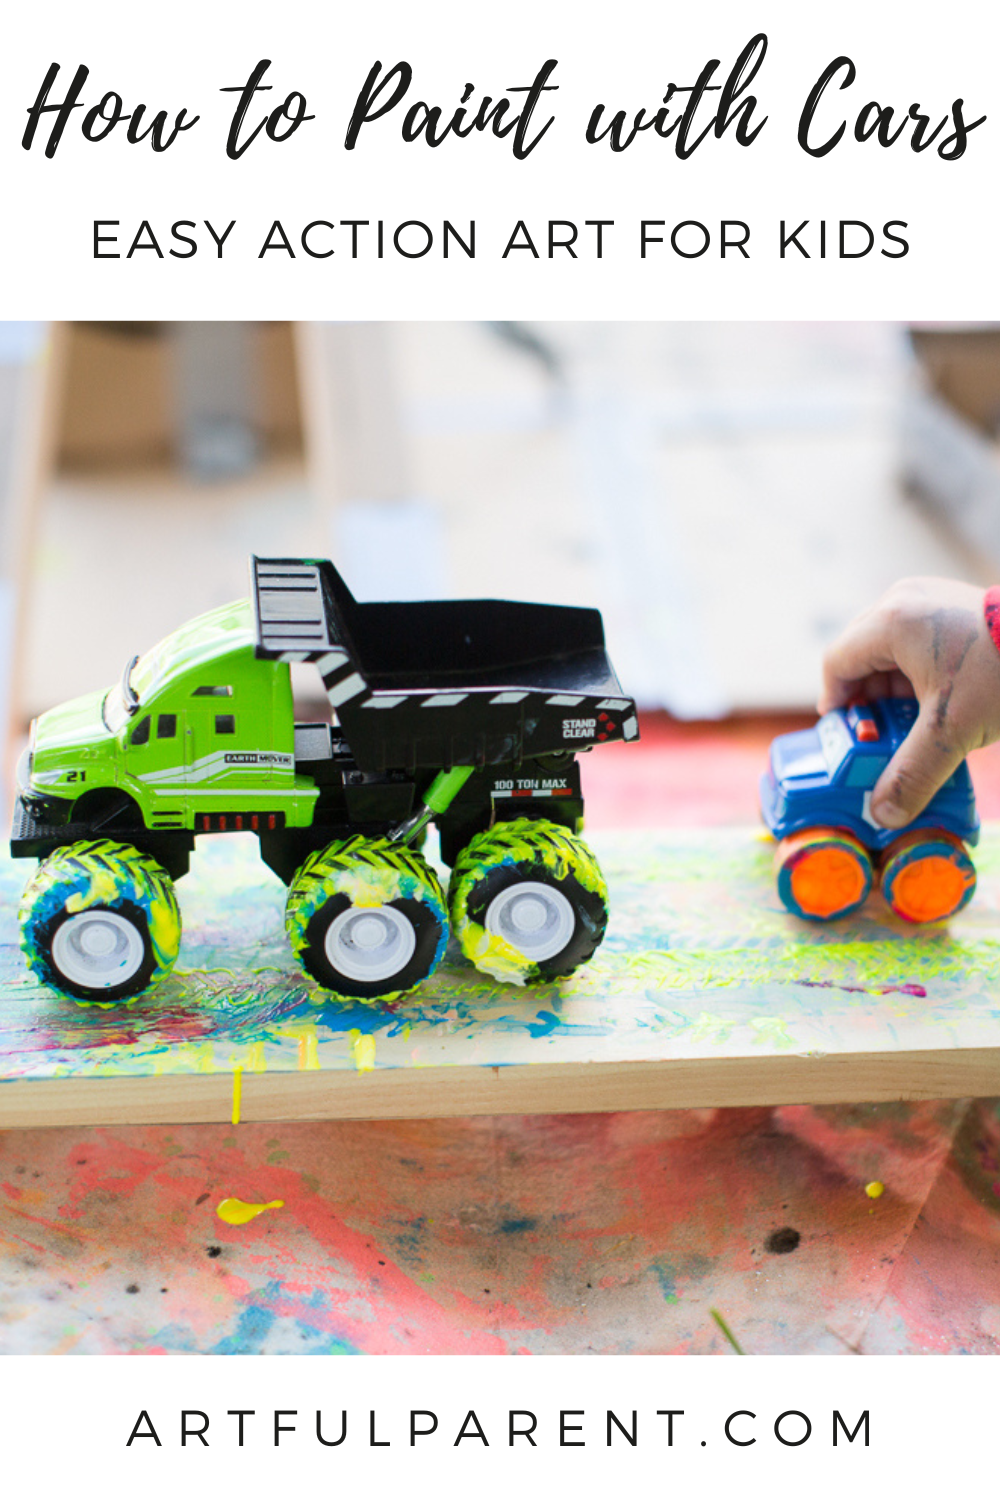 painting with cars pinterest